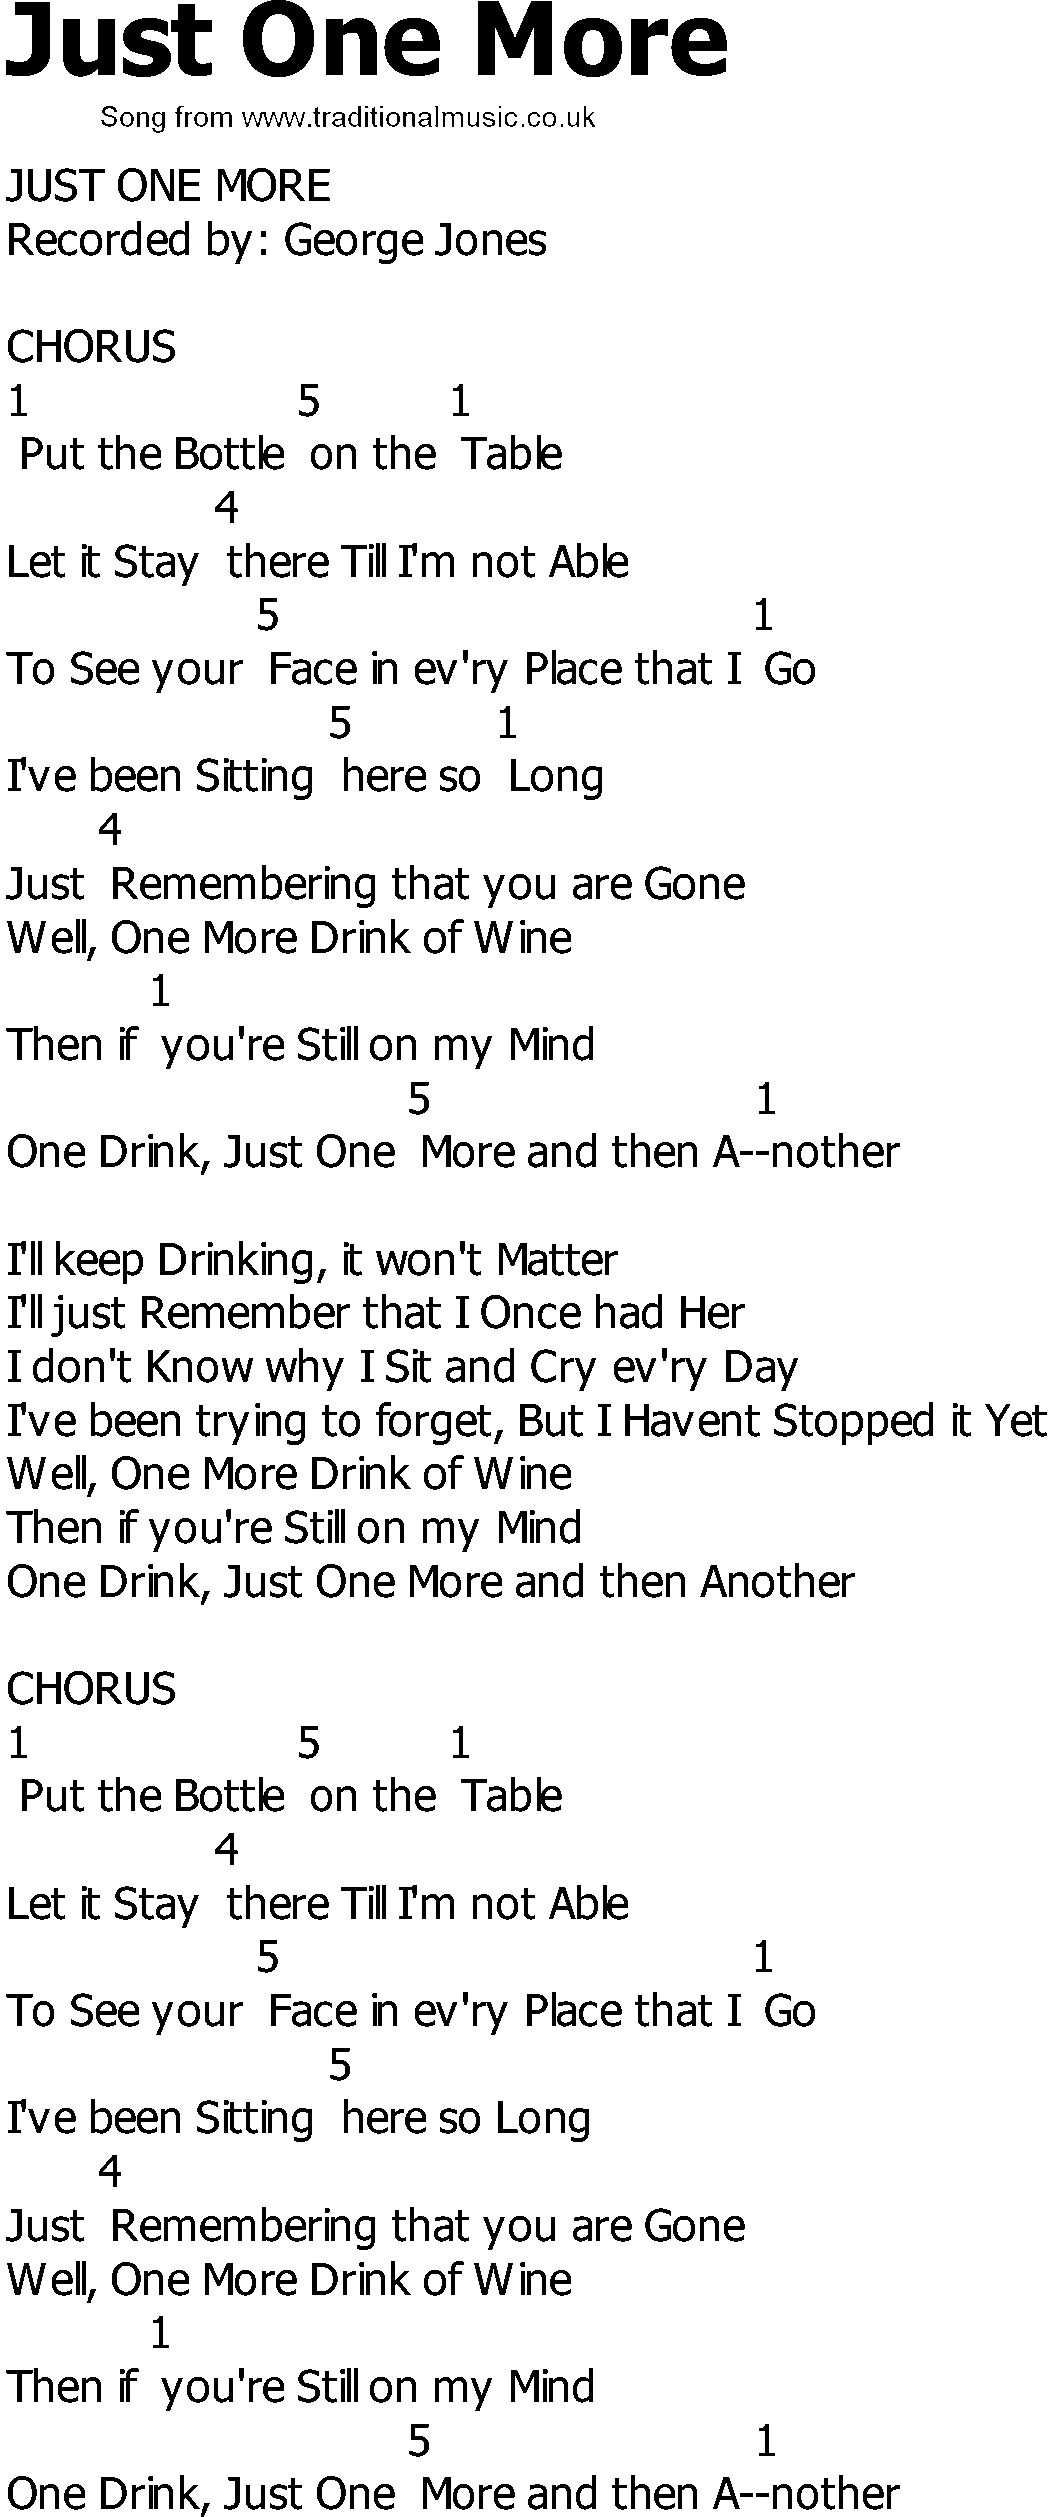 Old Country song lyrics with chords - Just One More